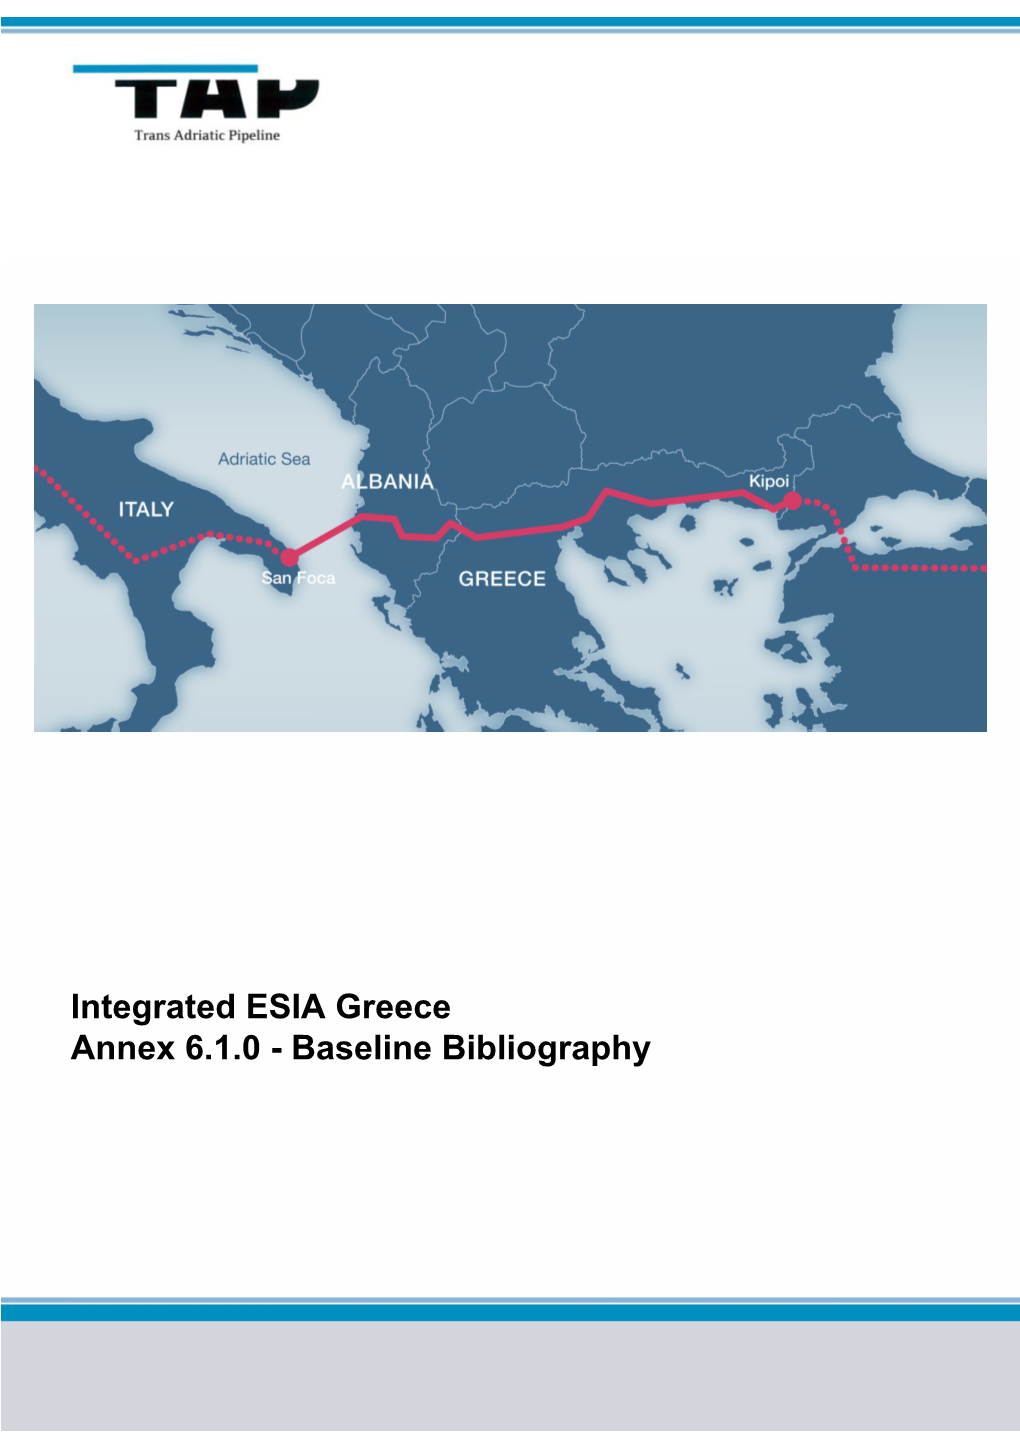 ESIA Greece Annex 6.1.0 - Baseline Bibliography Page 2 of 72